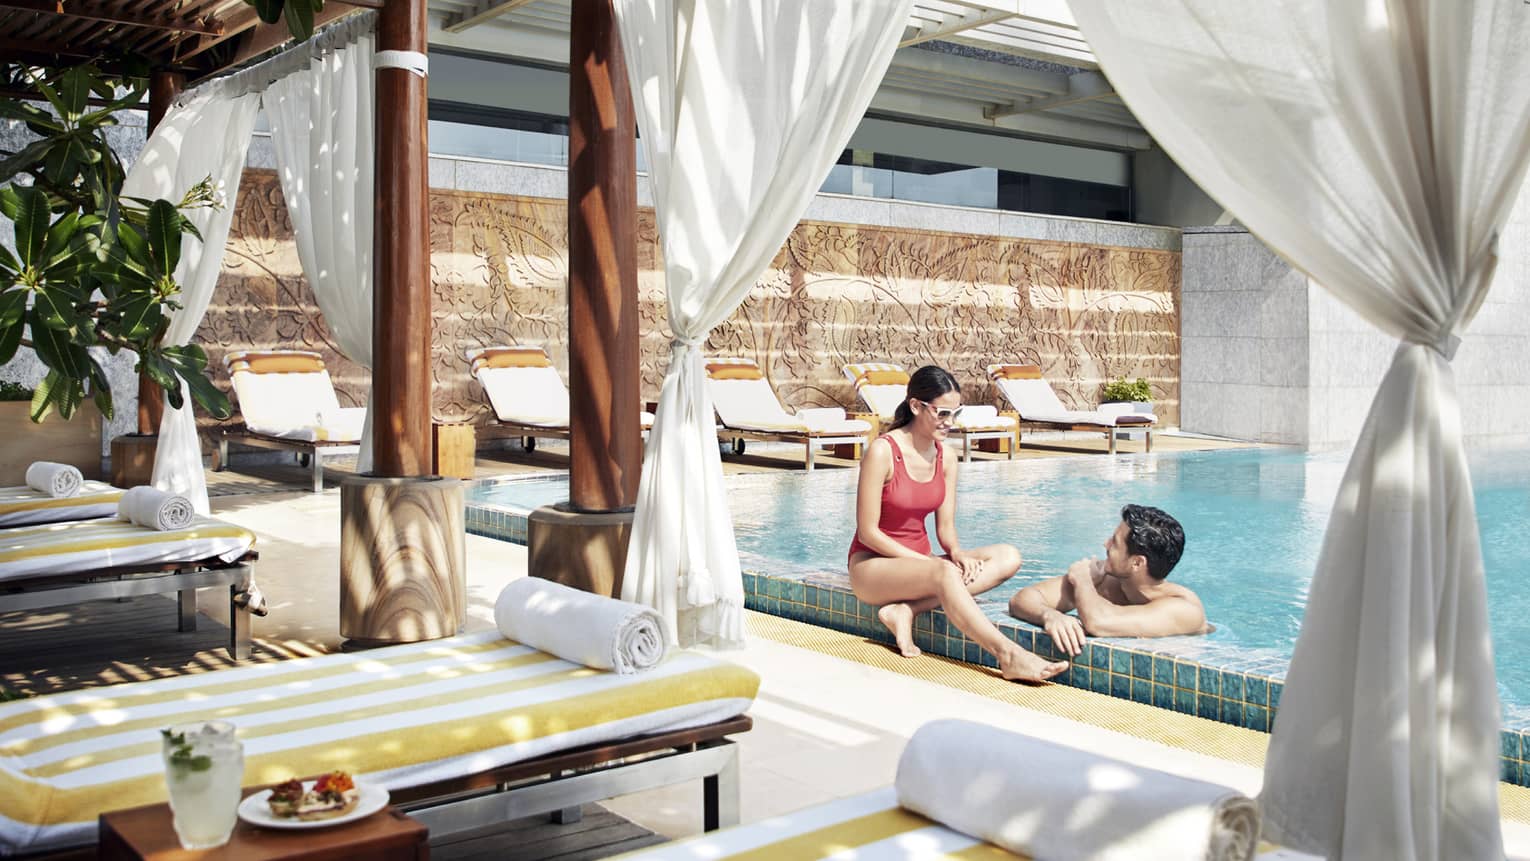 A couple lounges in the pool near a shaded cabana with fresh fruit